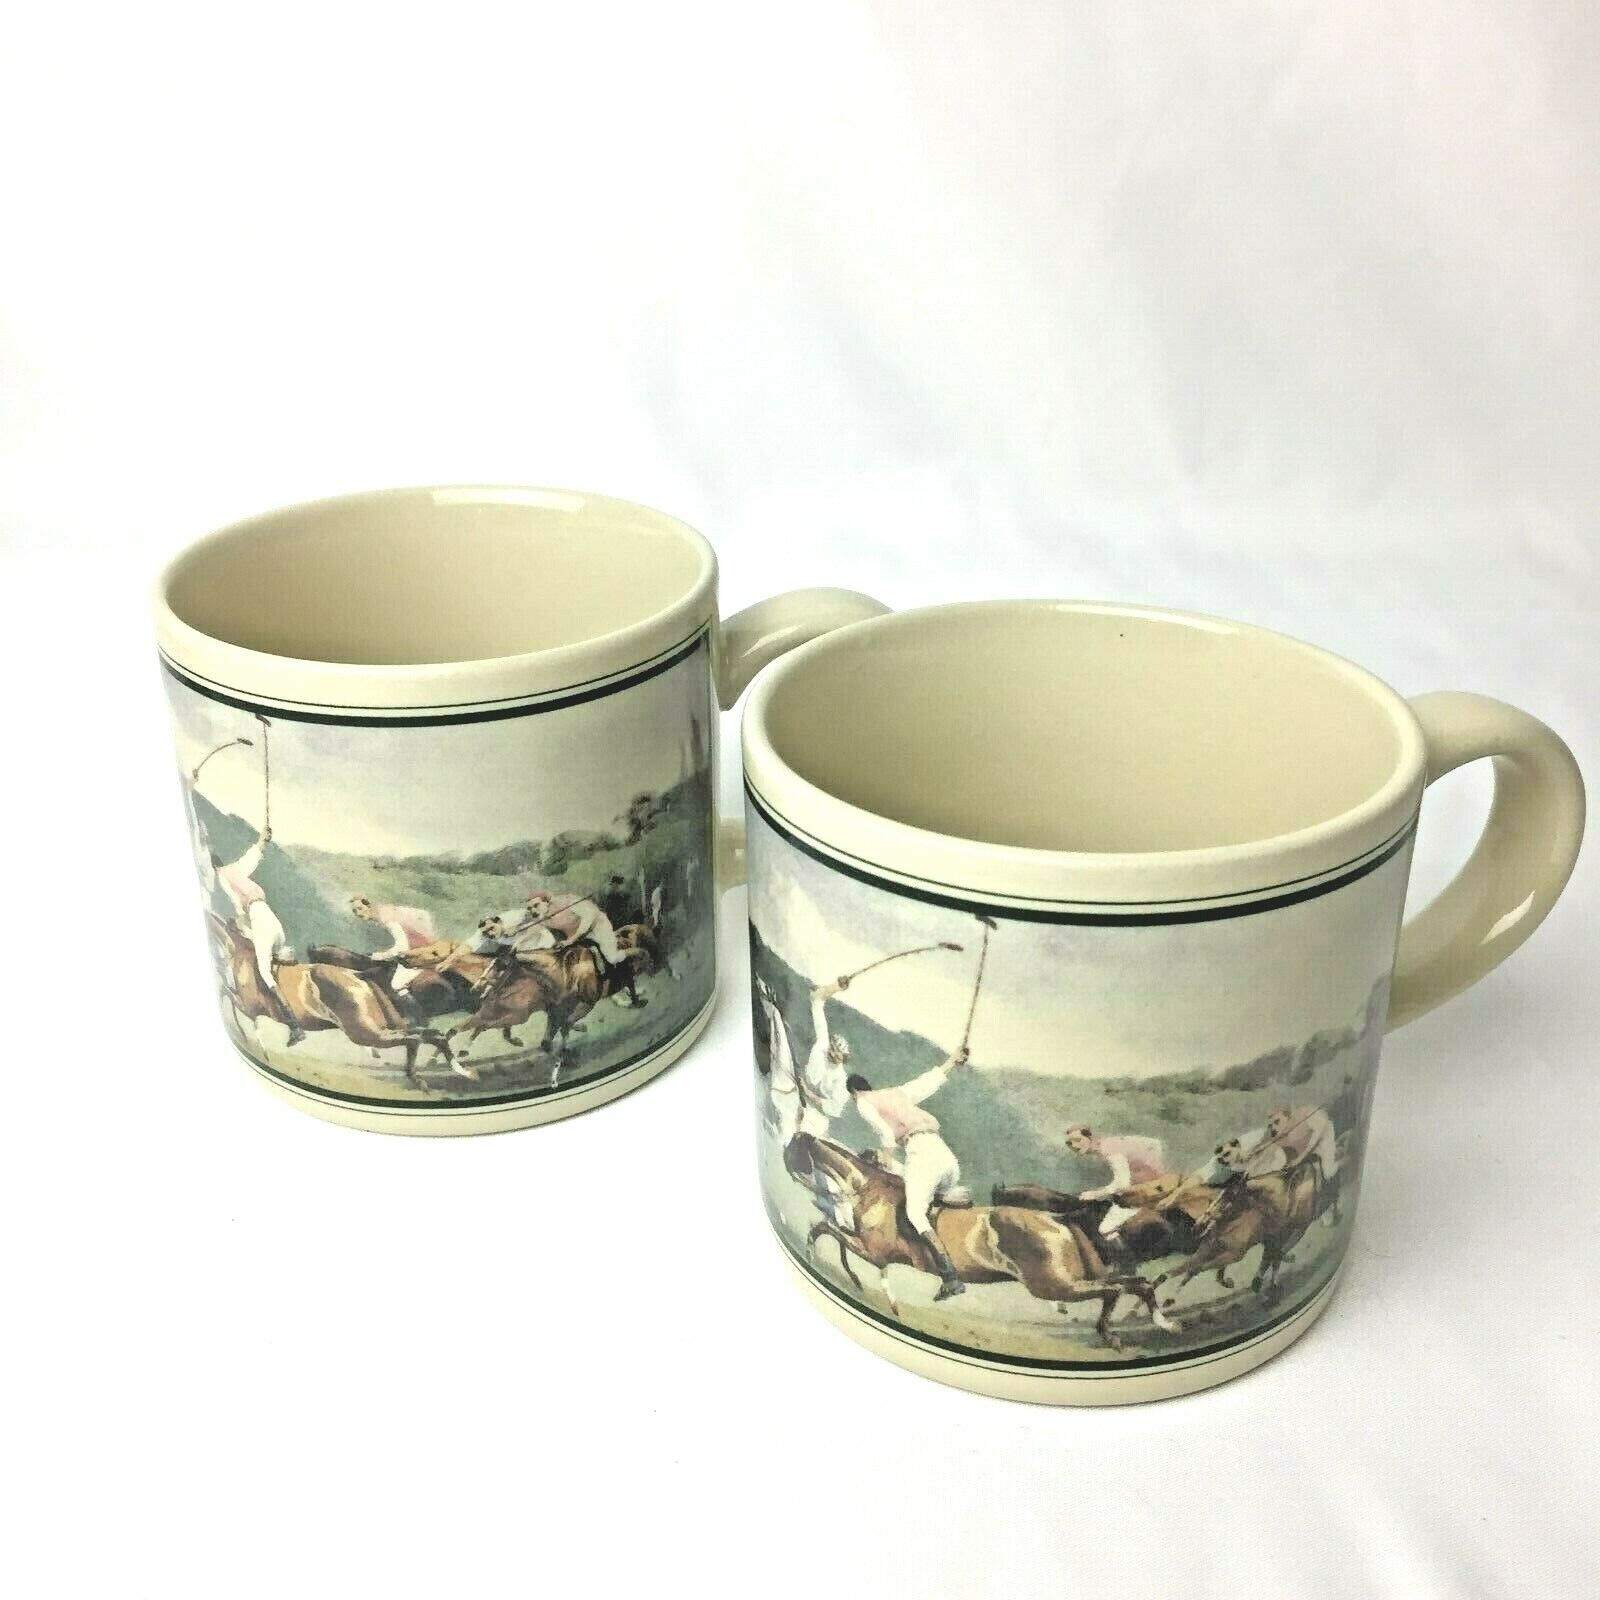 2 Vintage New Old Stock Mugs Polo Game Depicted 18th Century Signed Japan